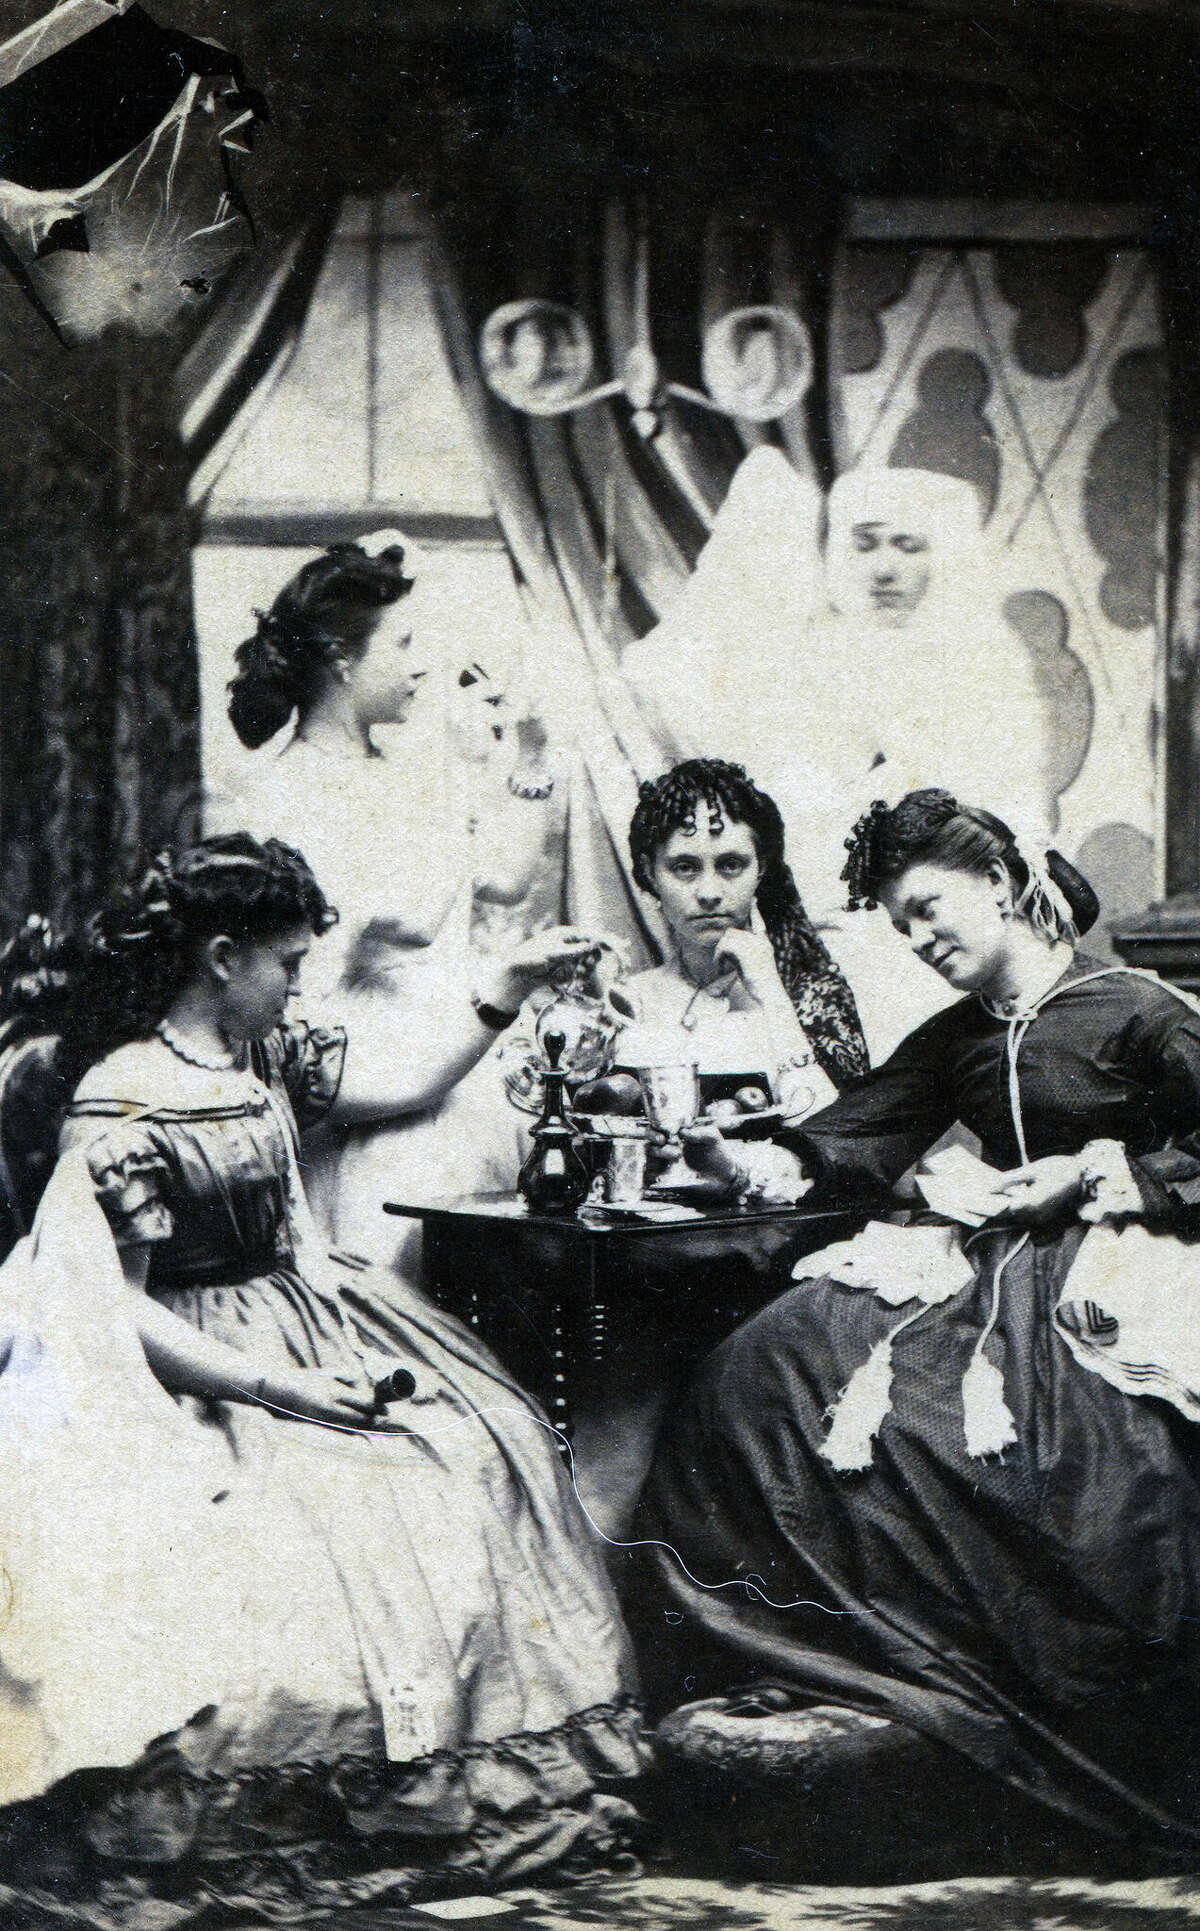 A group of young women meeting in a parlor with a ghostly figure in the background in Lowville, New York.